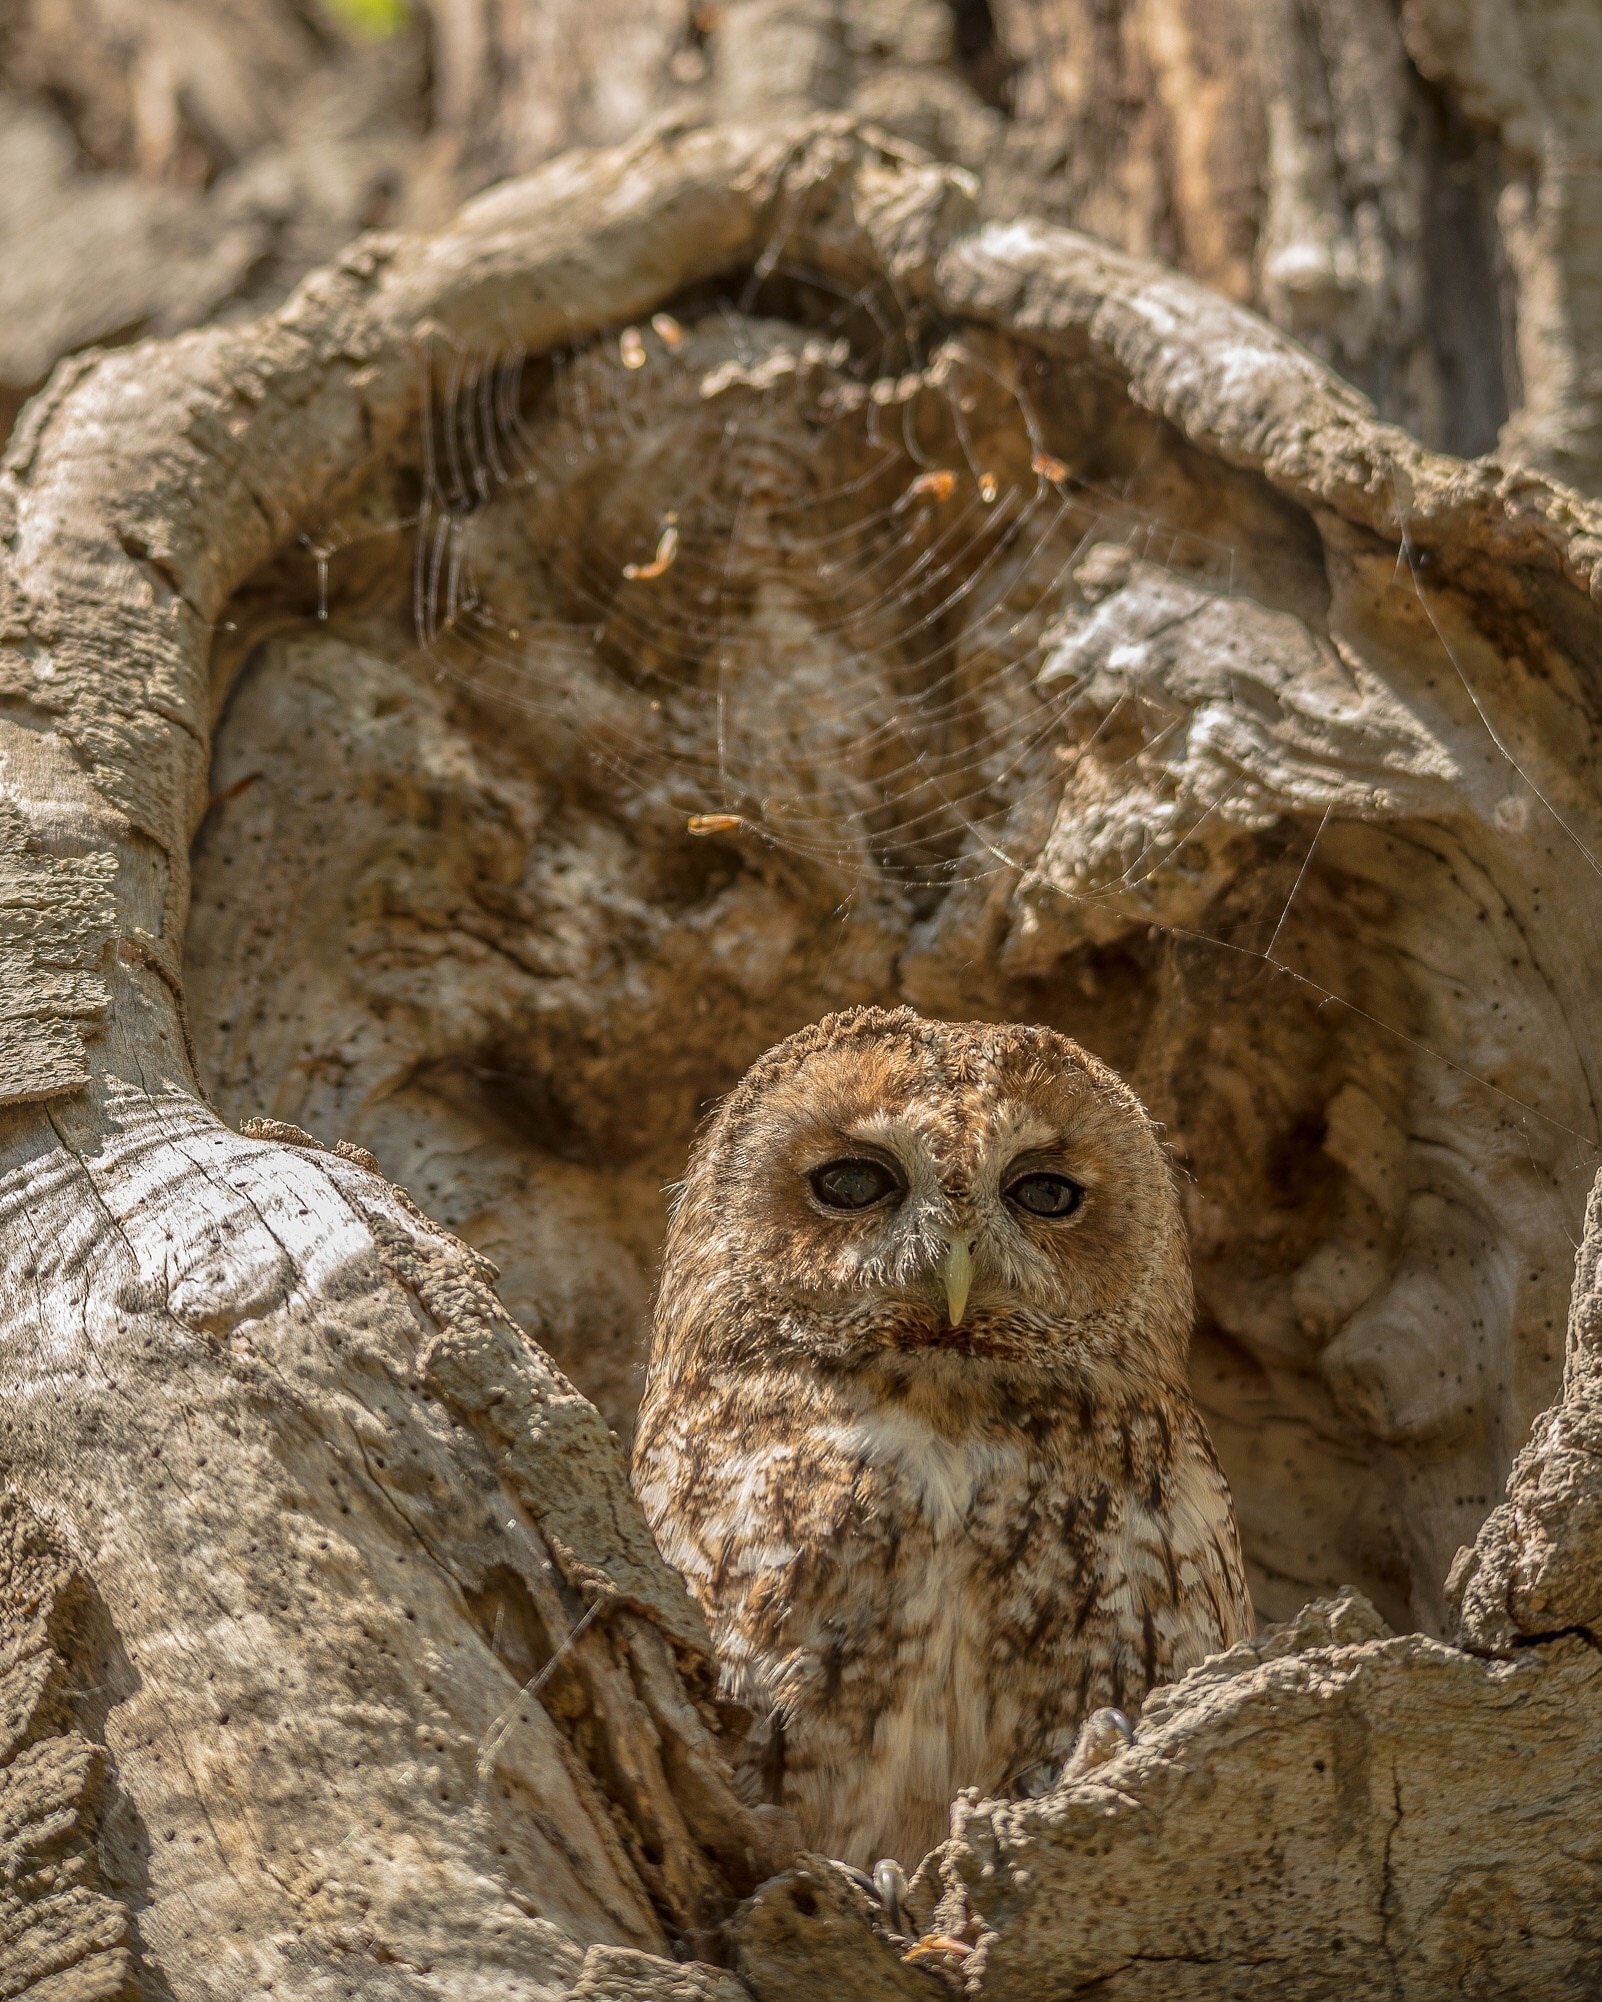 You can find more the UFO in Rendlesham forest. Tawny owl camouflaged in a tree cavity for instance 


#Wildlife #owl #britain #uk #England #suffolk #tawnyowl #spring #treecavity #nature #forest #woods #wildlife #nature